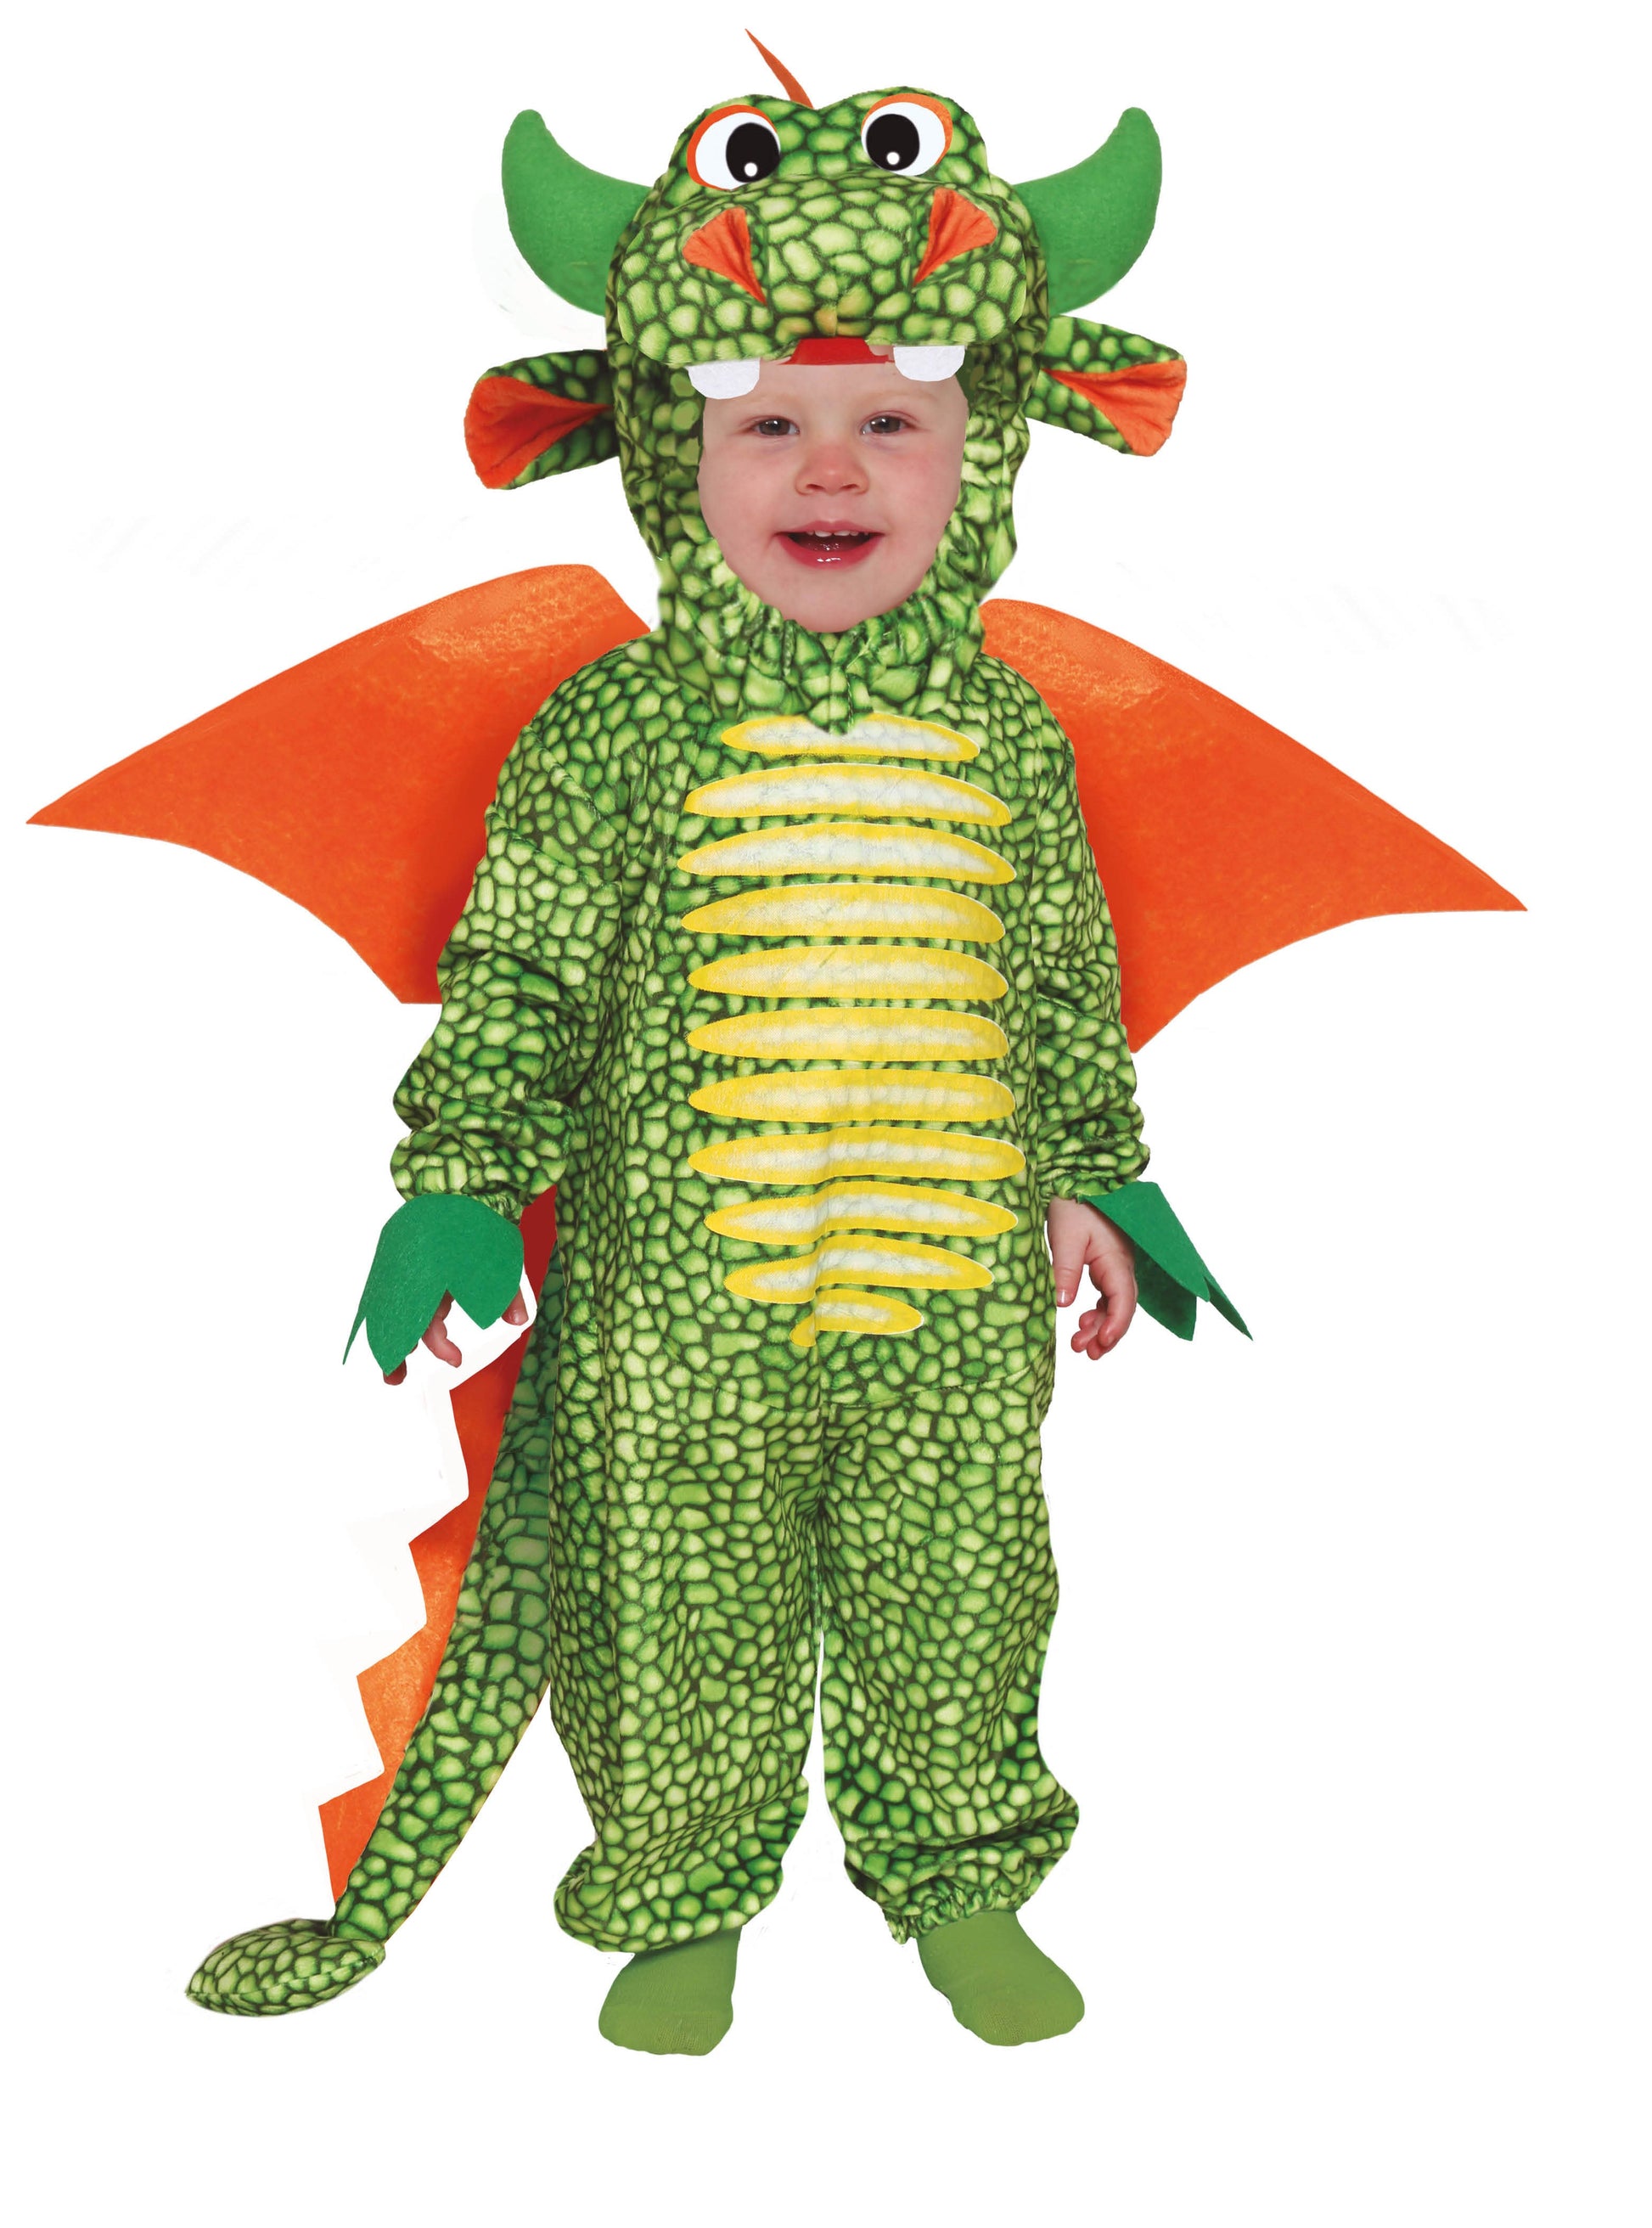 Baby Dragon Costume includes jumpsuit| headpiece| wings and tail